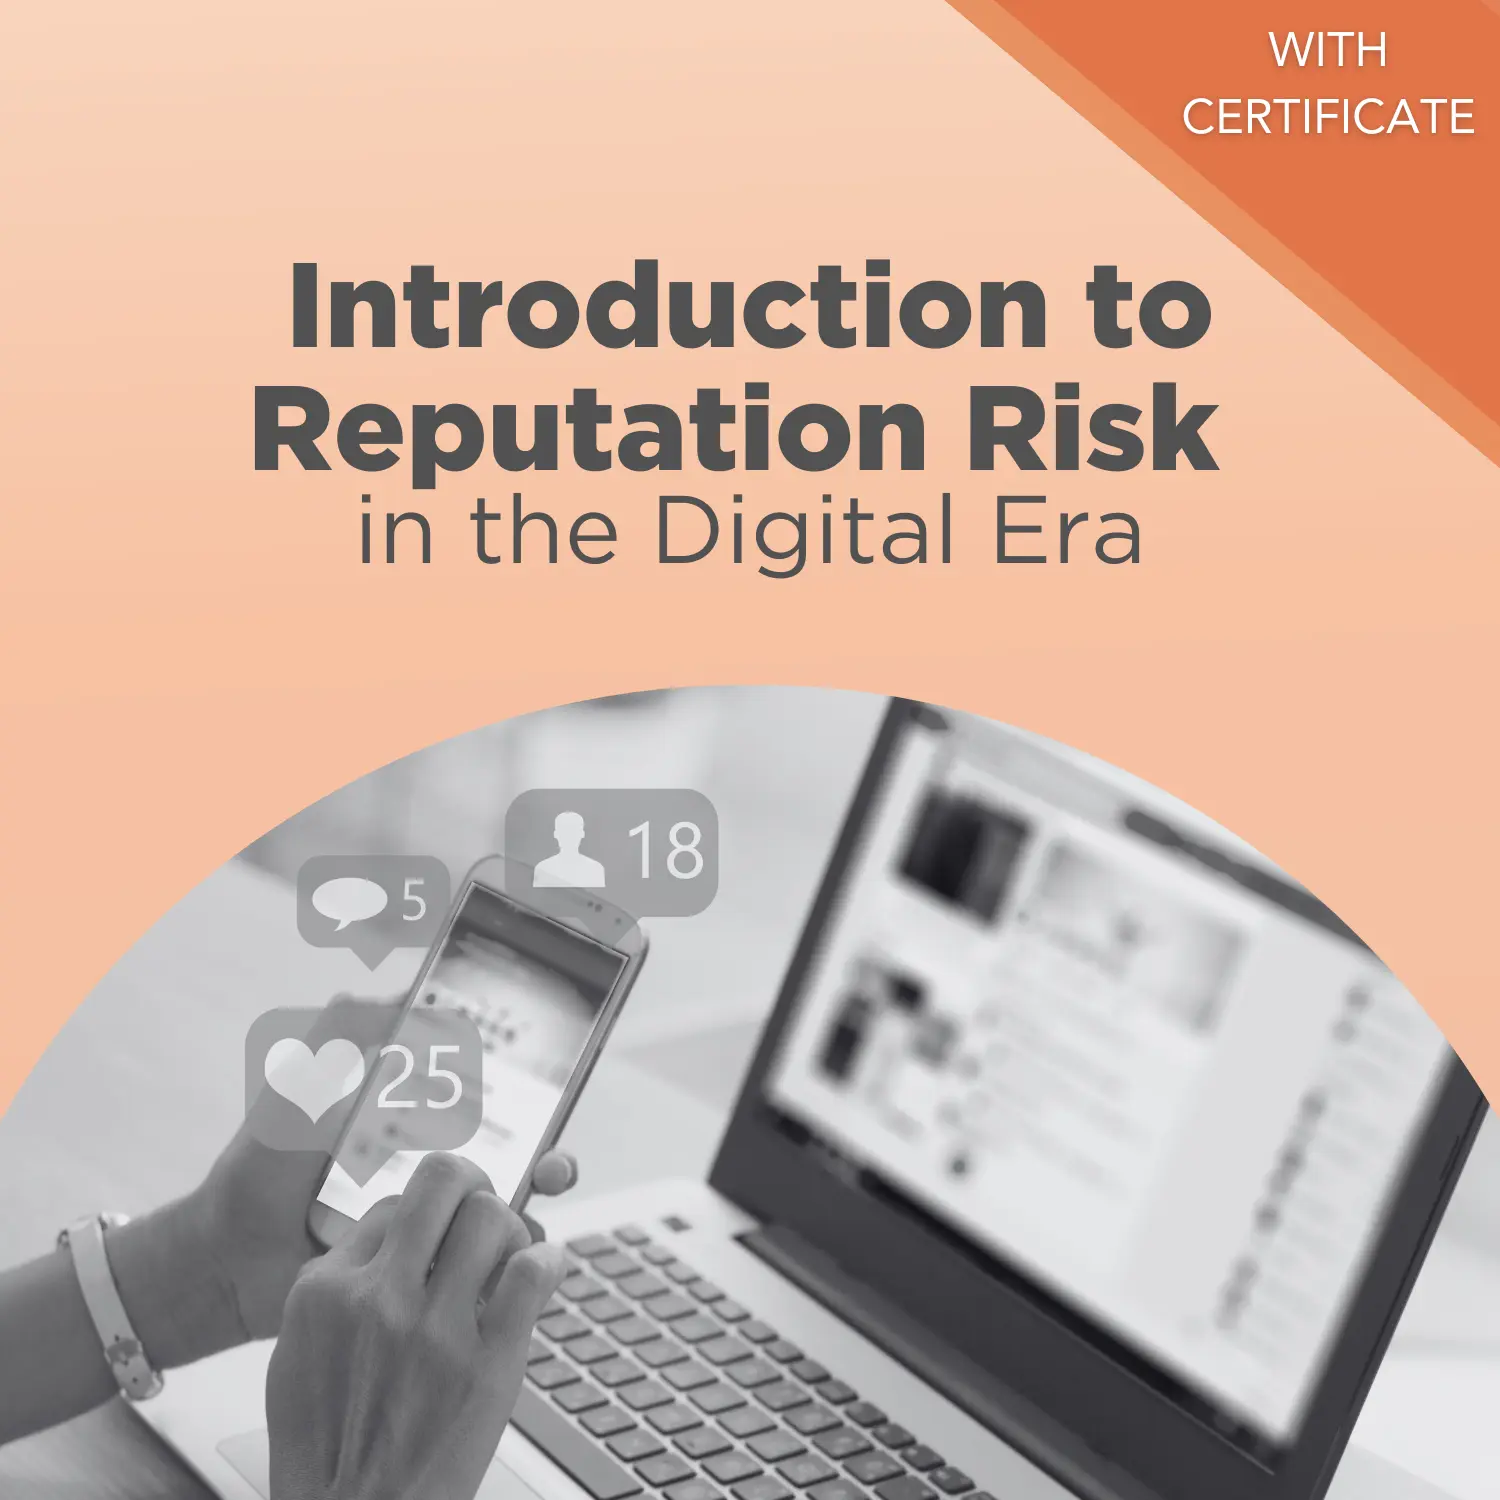 Introduction to Reputation Risk in the Digital Era